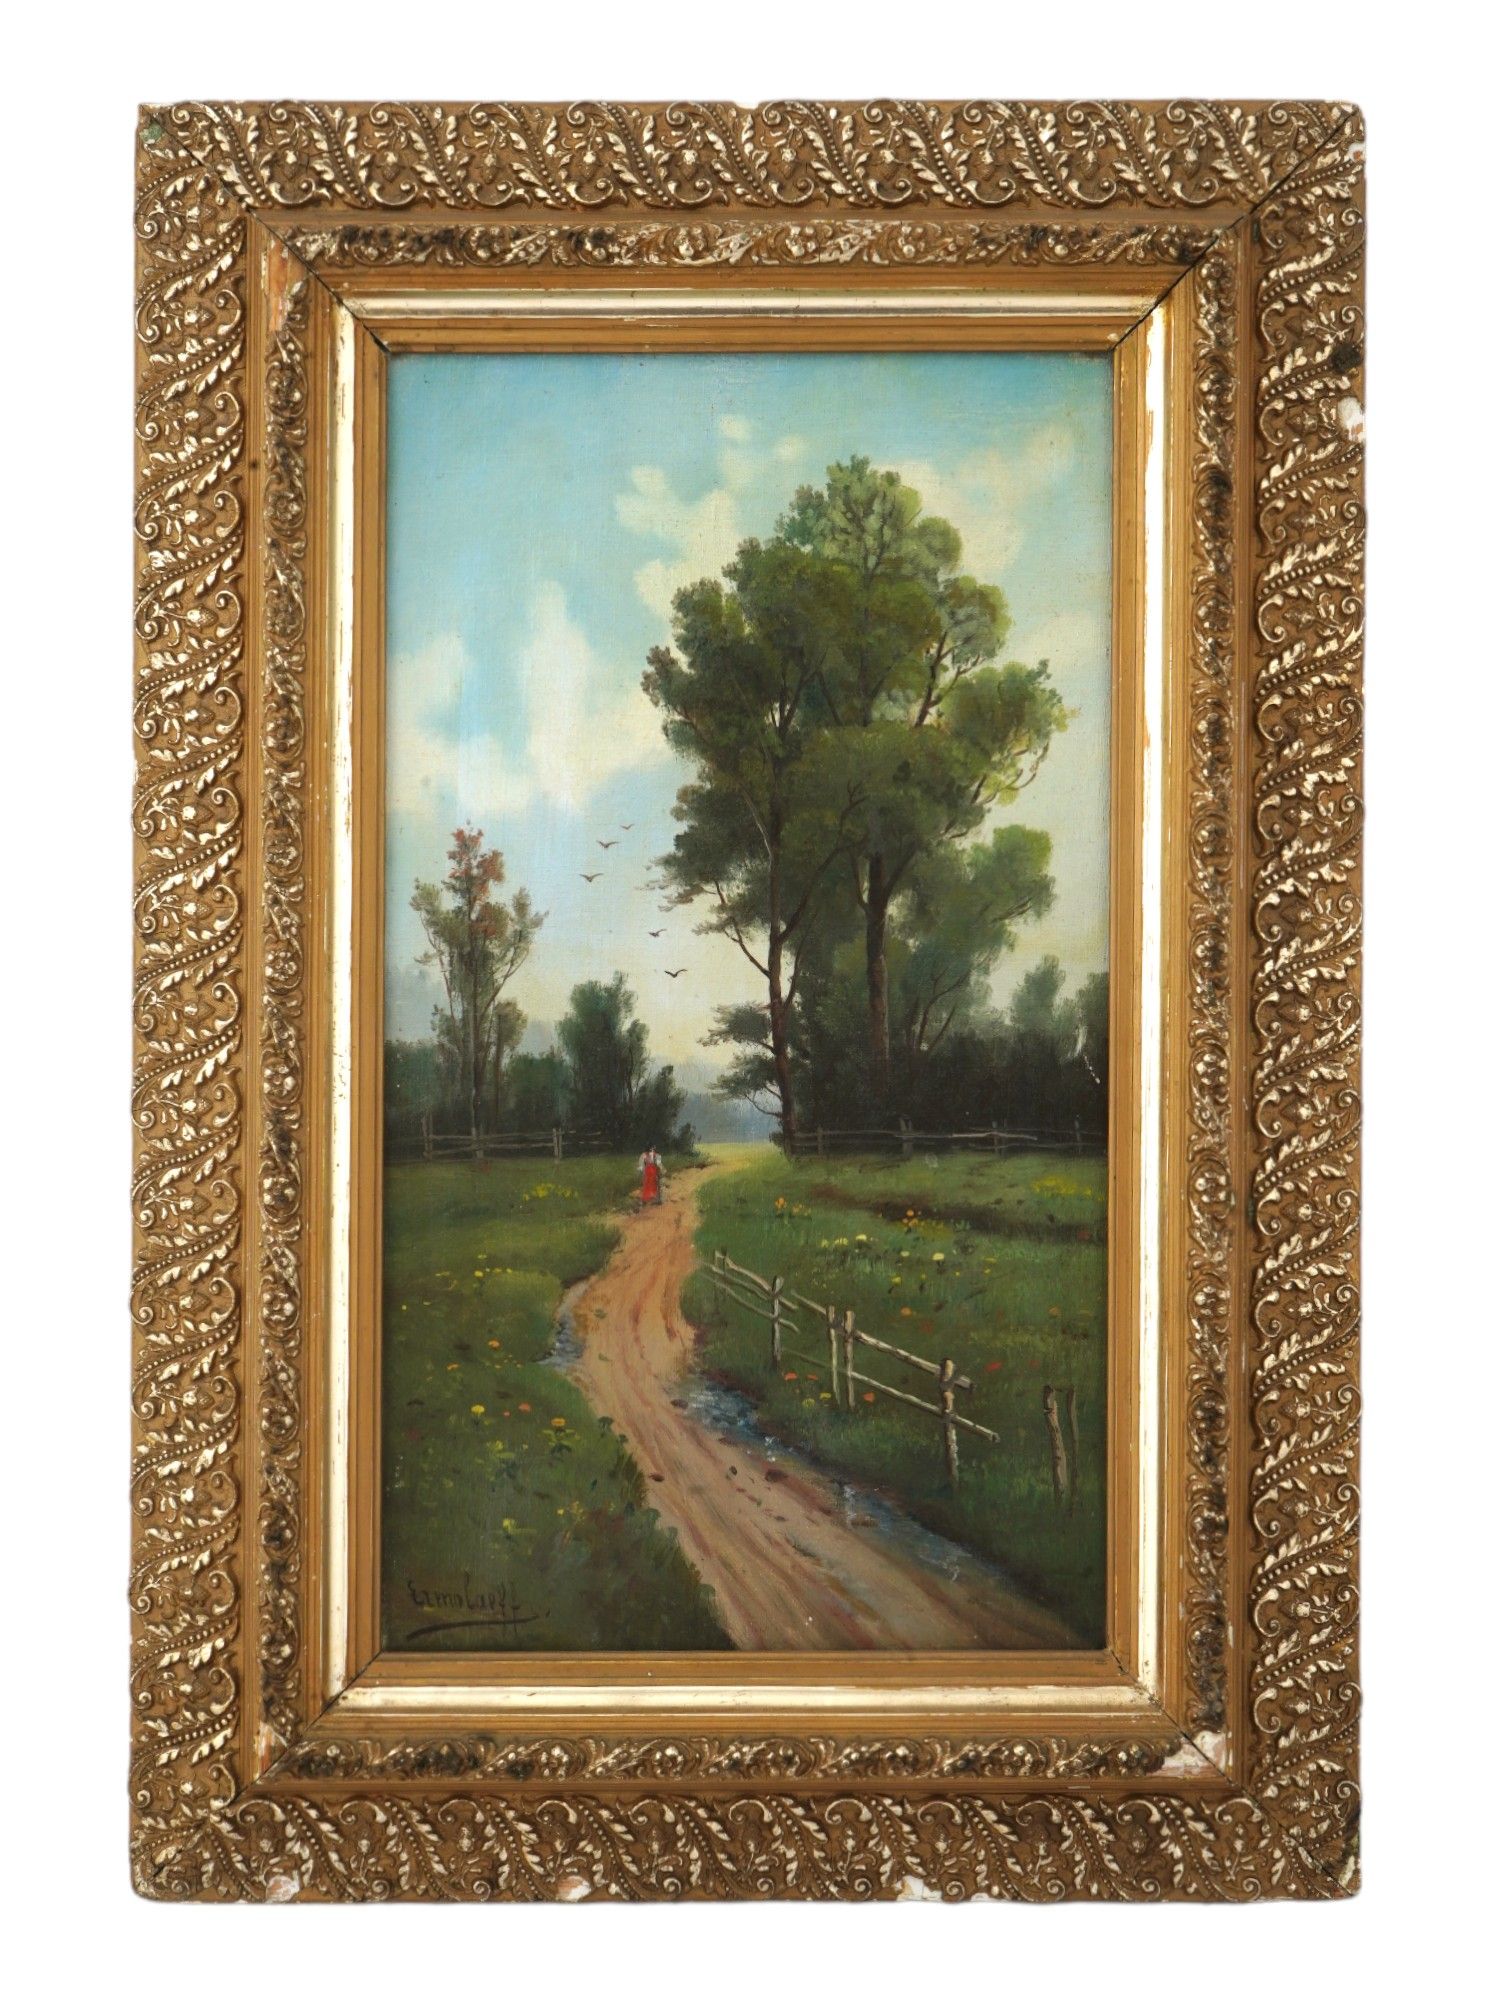 ANTIQUE RUSSIAN OIL REALIST LANDSCAPE PAINTING SIGNED PIC-0